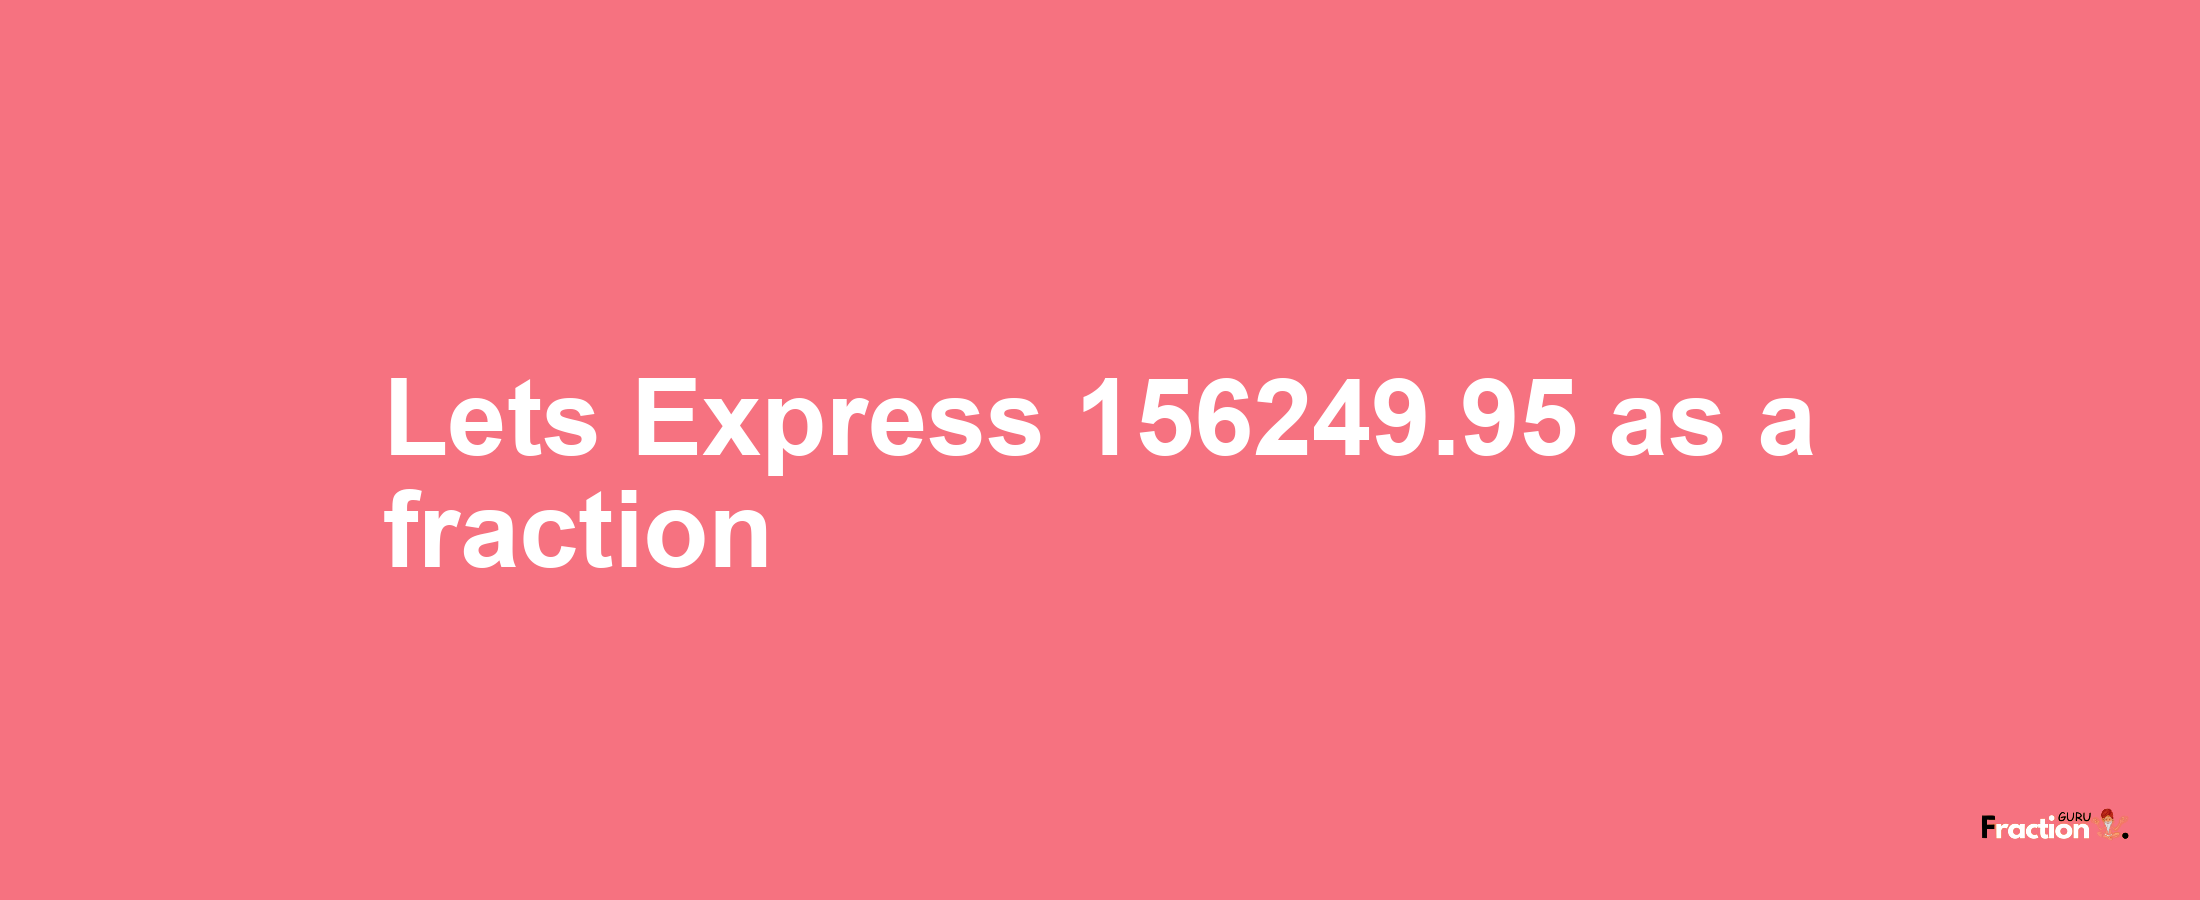 Lets Express 156249.95 as afraction